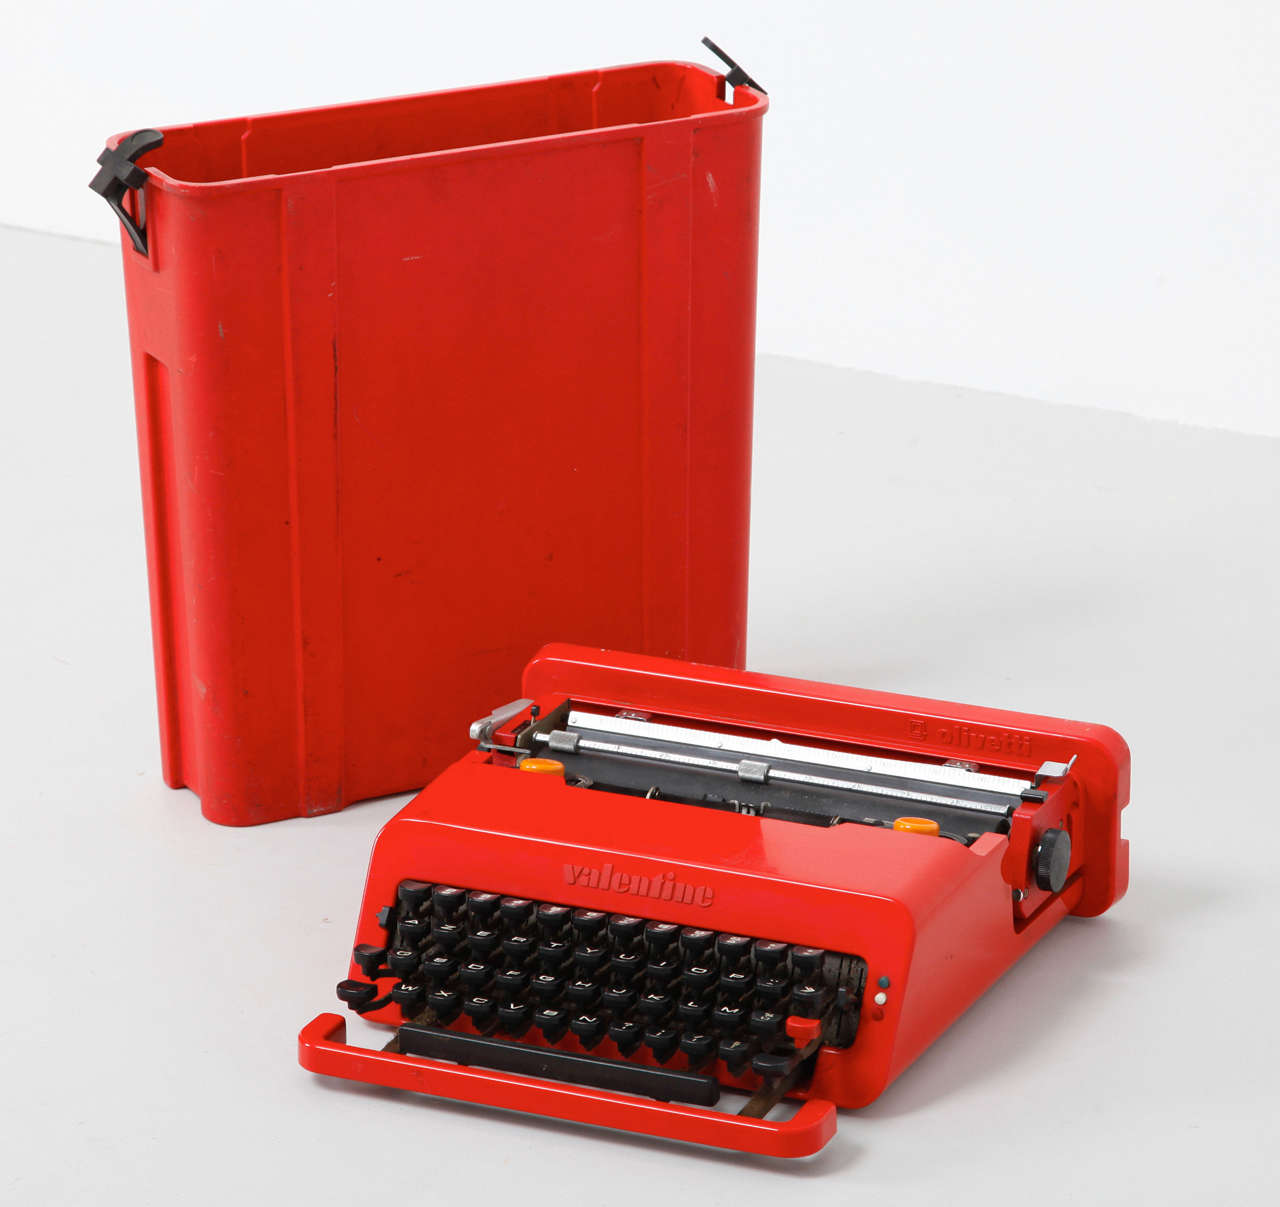 The Olivetti Valentine portable typewriter was designed by Perry King in collaboration with Ettore Sottsass and was in production in 1969. As a typewriter the Valentine was not an outstanding commercial success, however its radical design was